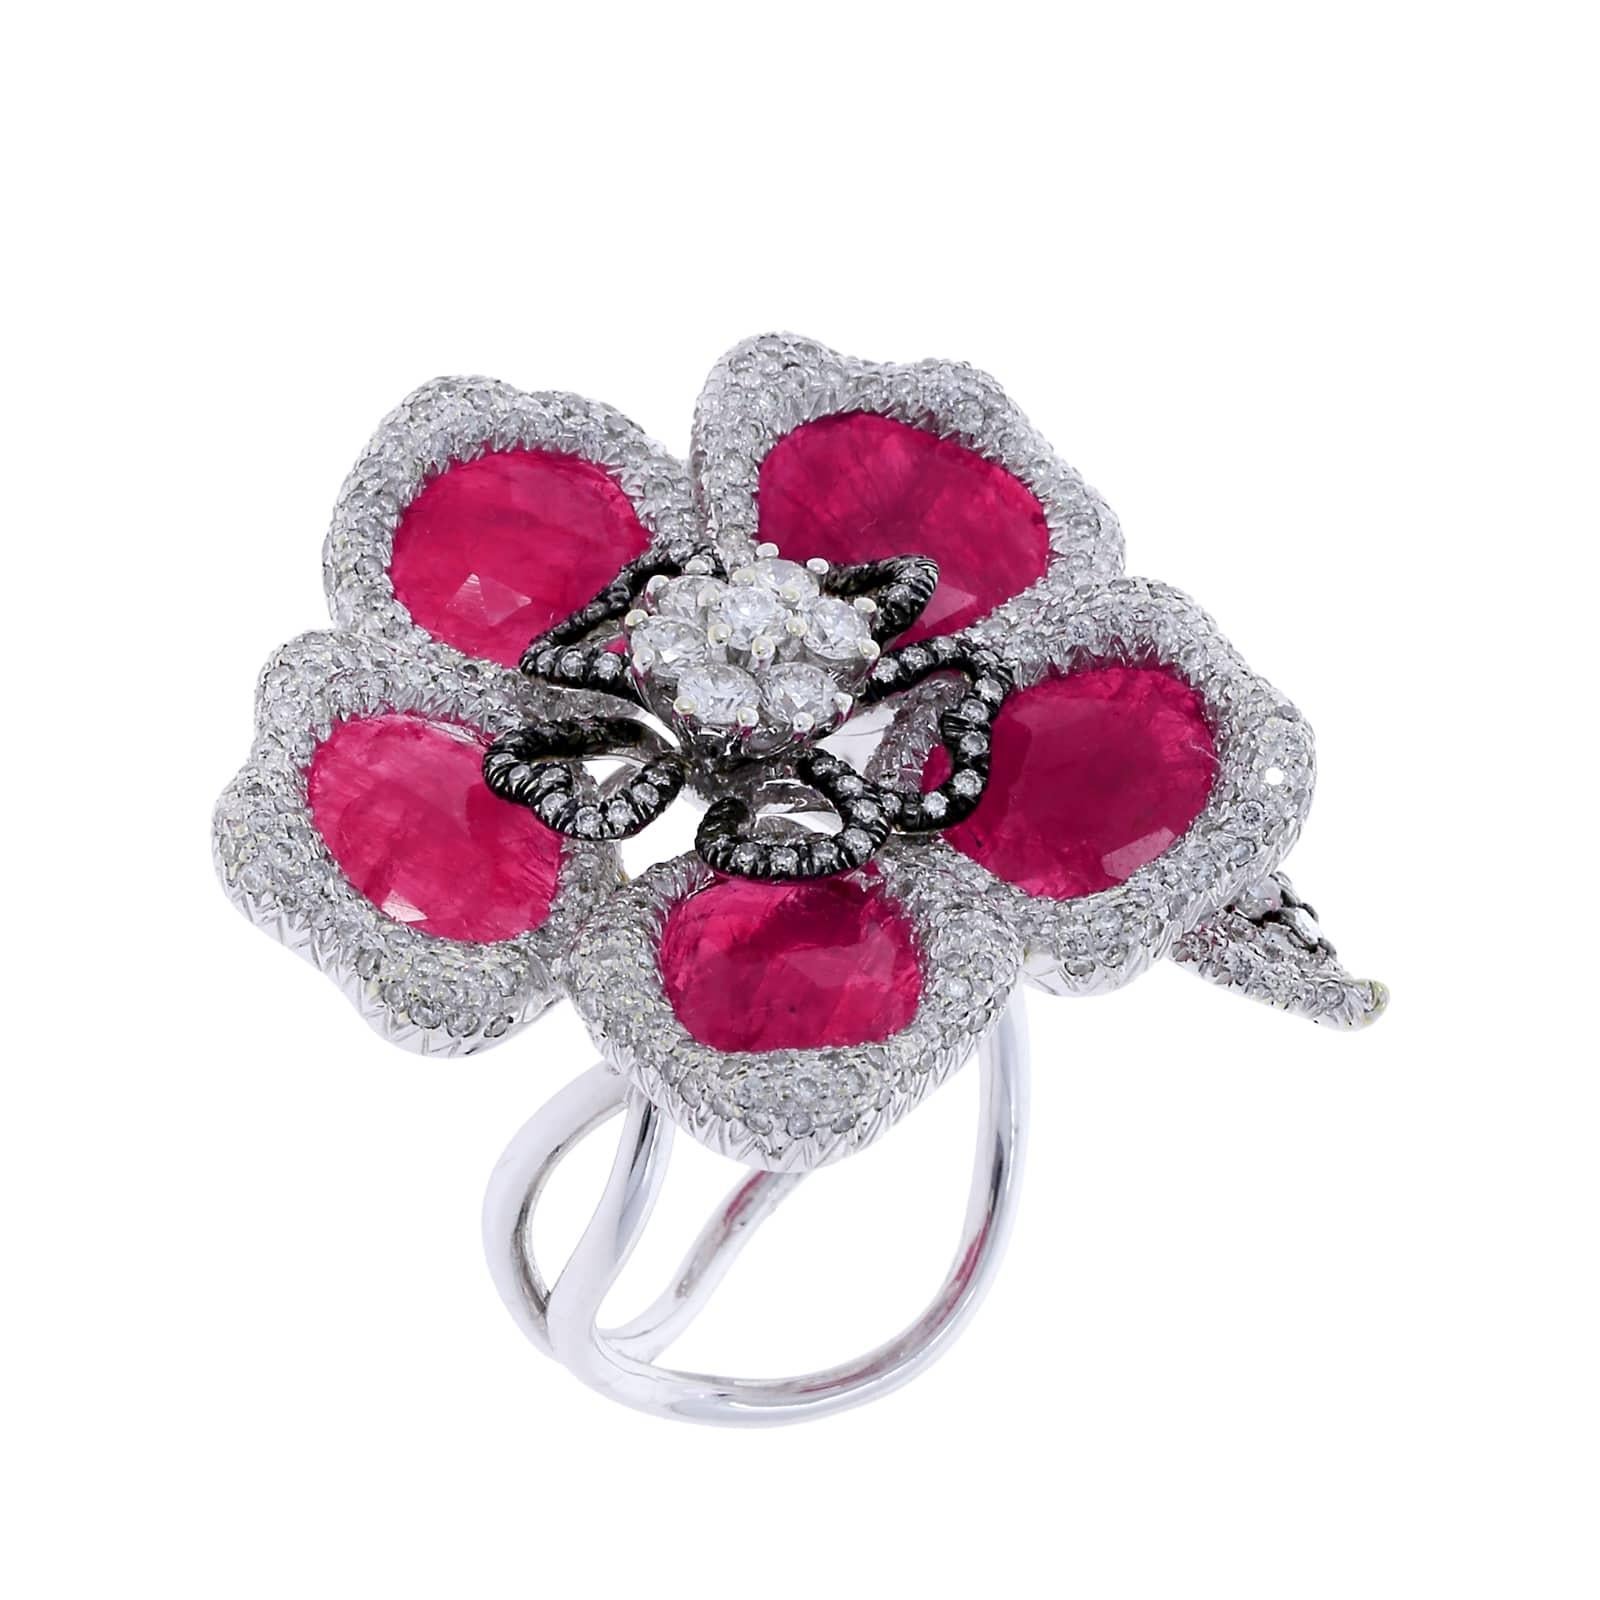 Women's or Men's Ruby Petals and Diamond Floral Ring